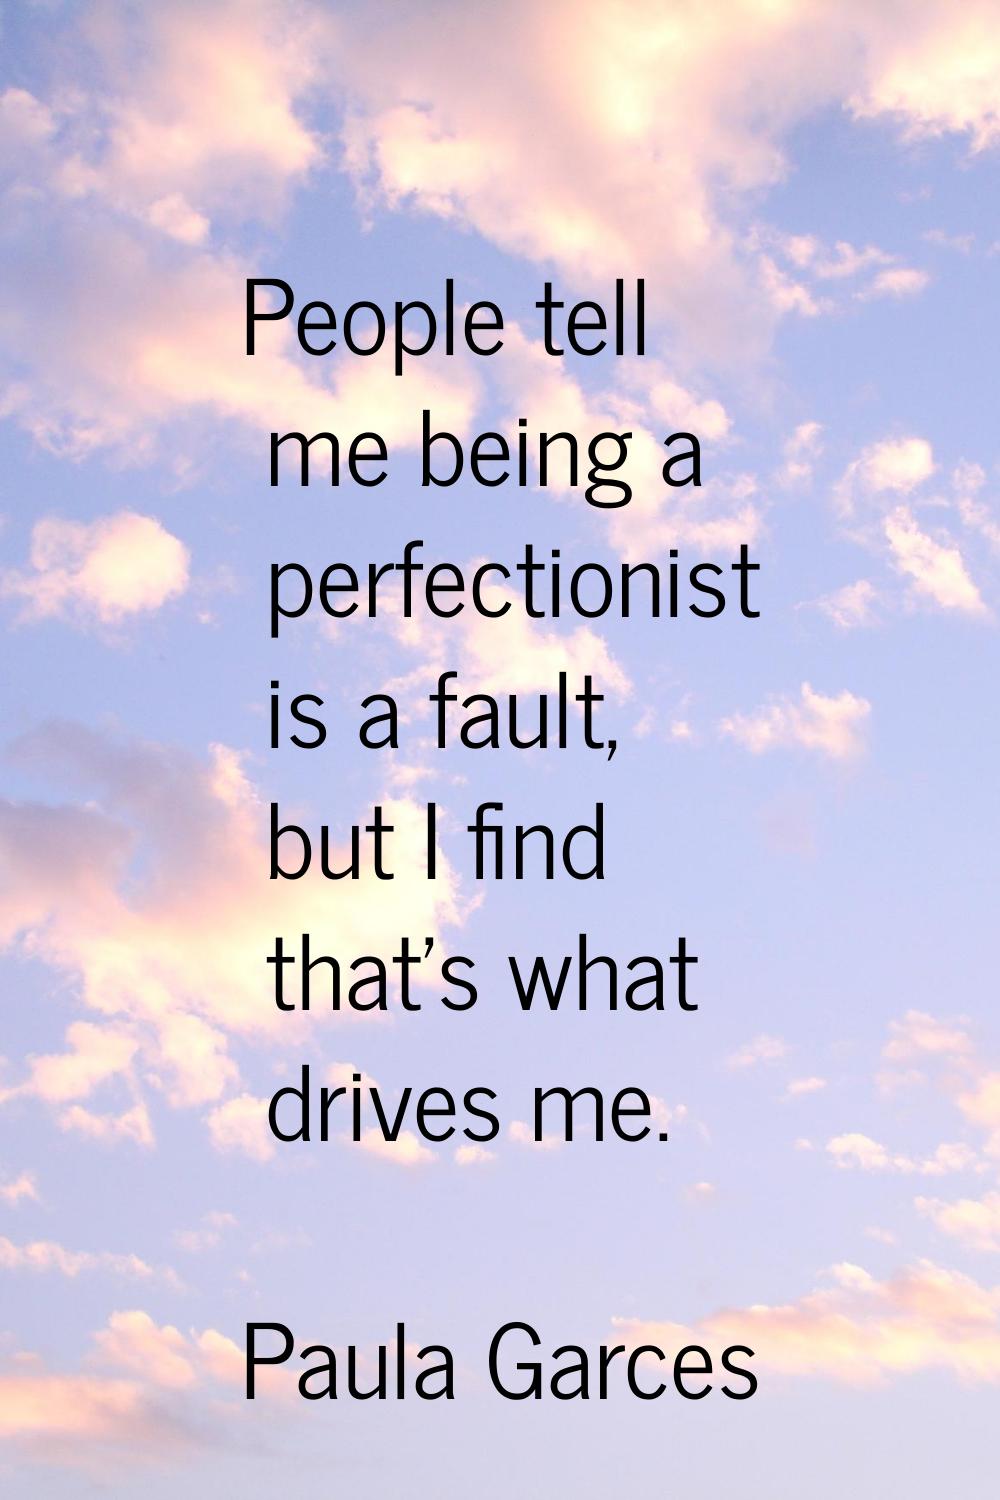 People tell me being a perfectionist is a fault, but I find that's what drives me.